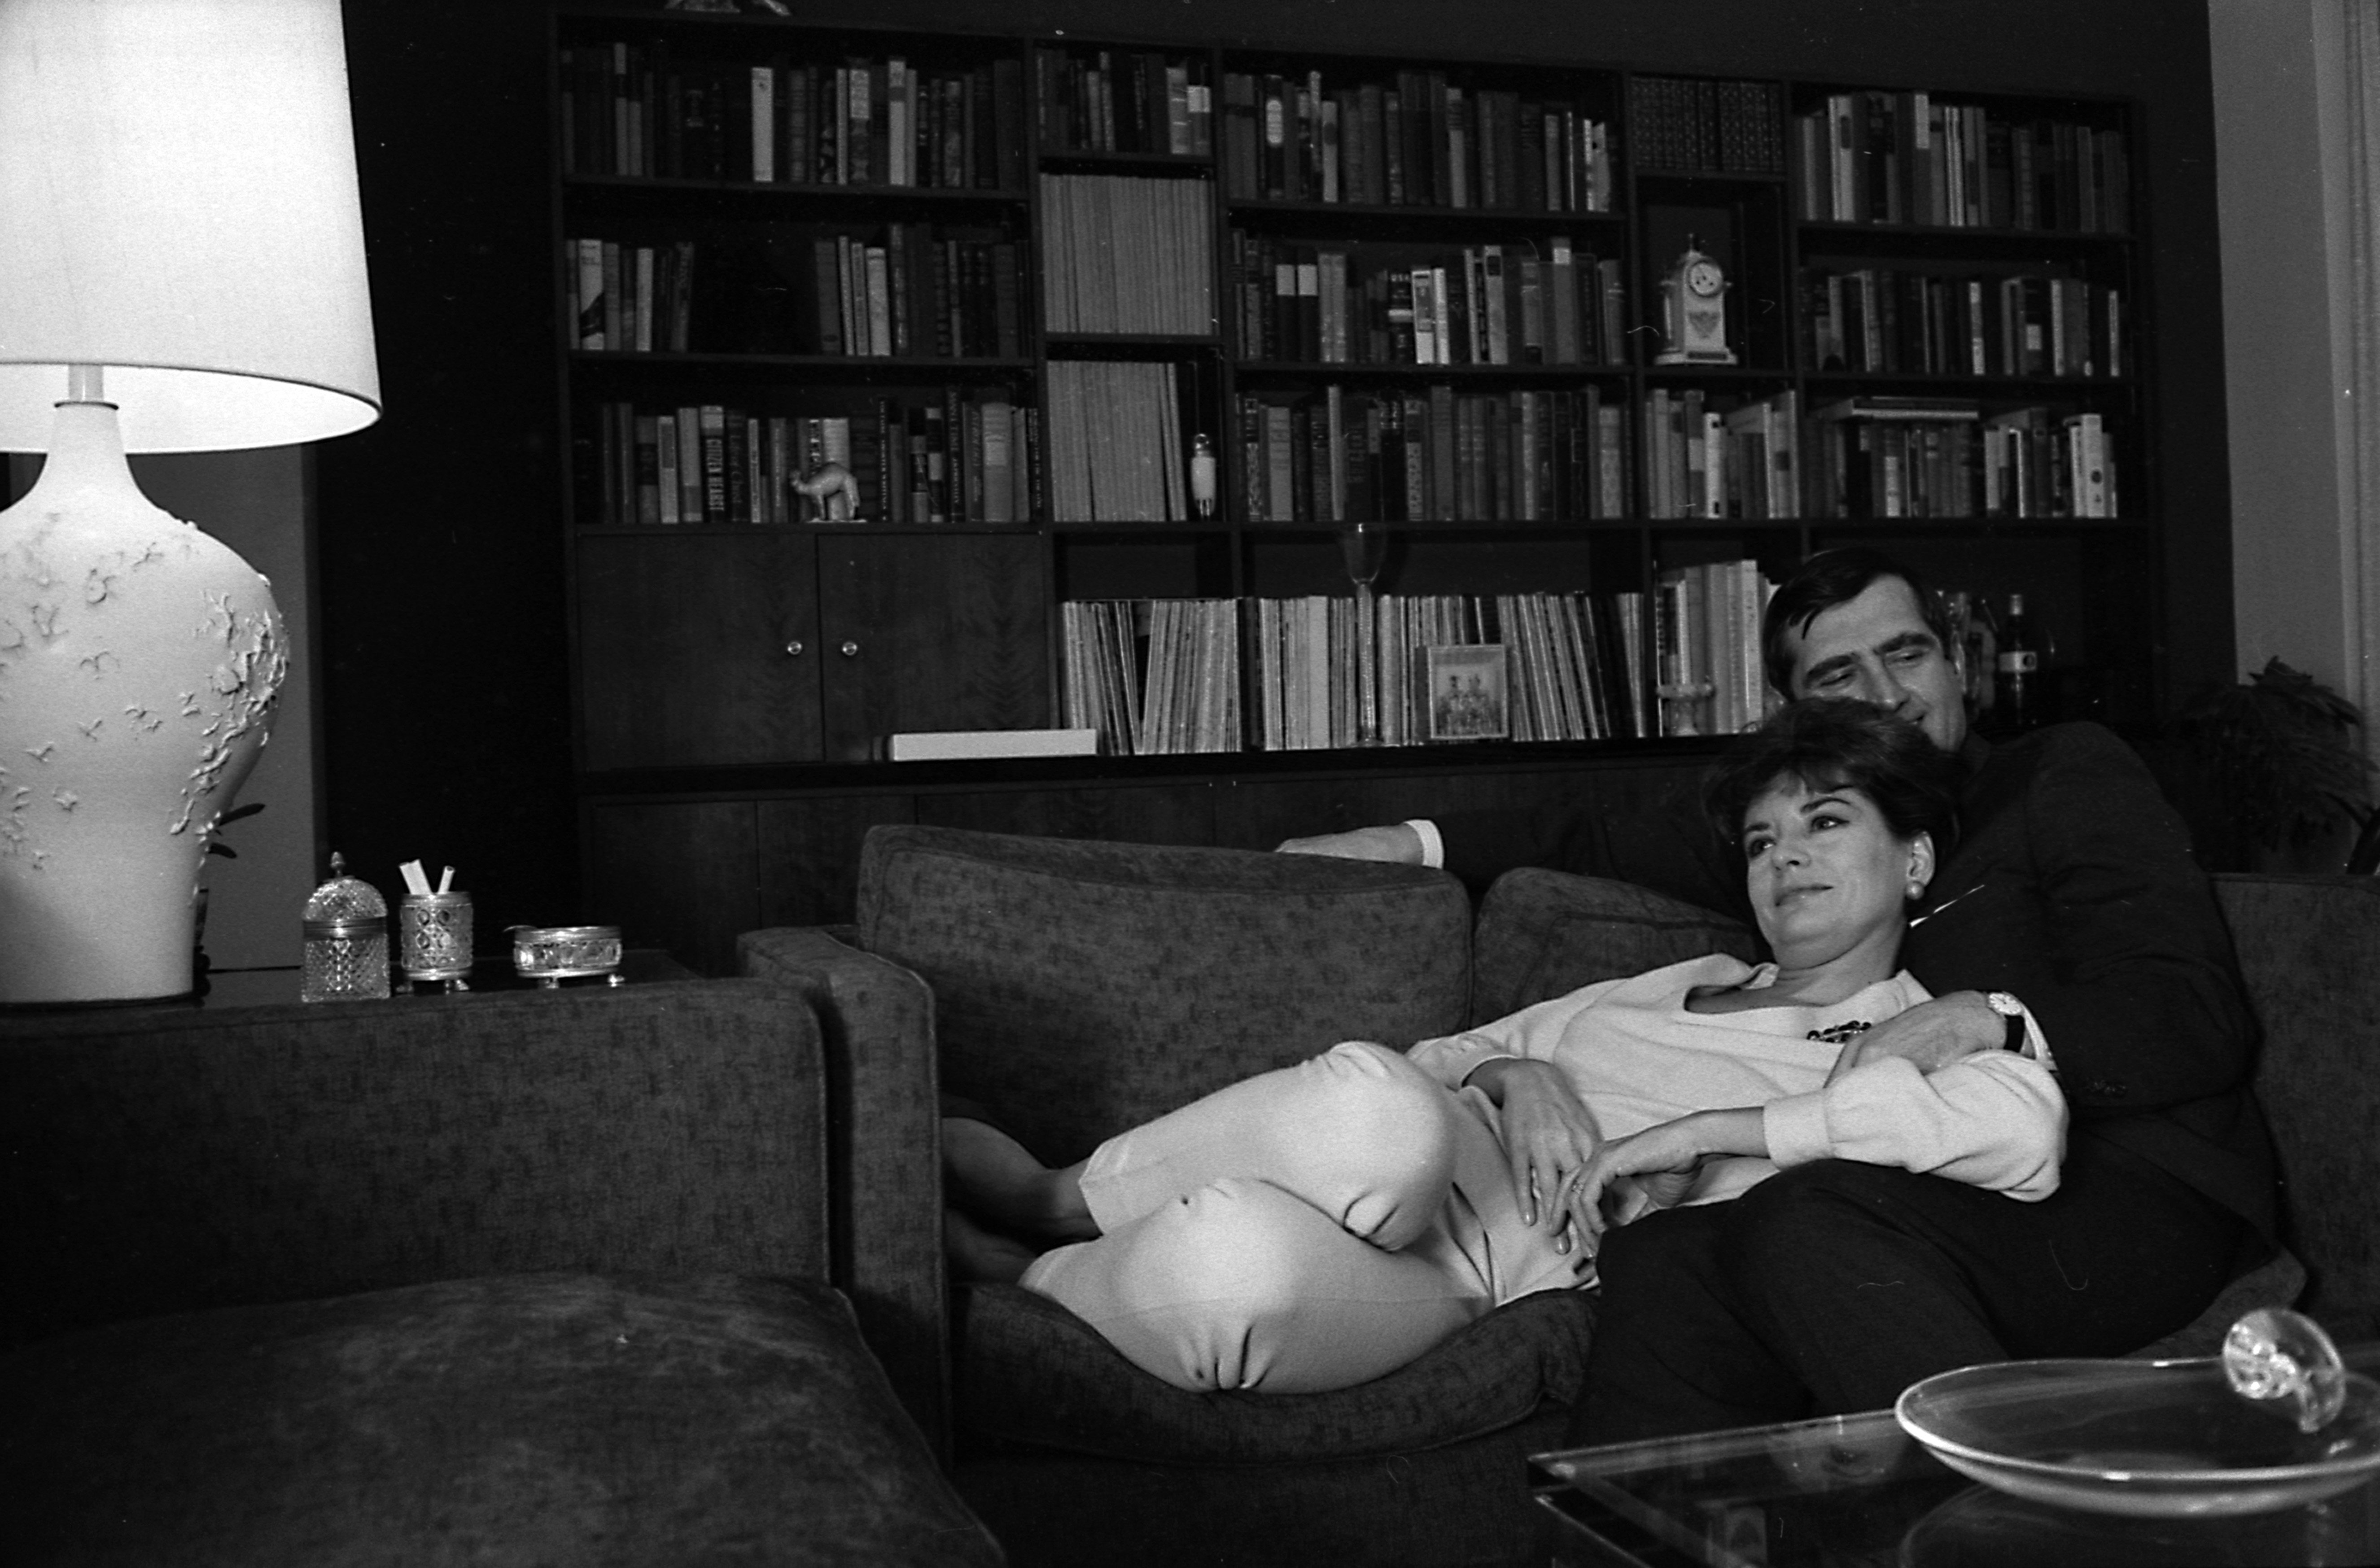  Barbara Walters and her husband, businessman and theatre producer Lee Guber (1920 - 1988), relax at home, New York, 1966 | Photo: GettyImages